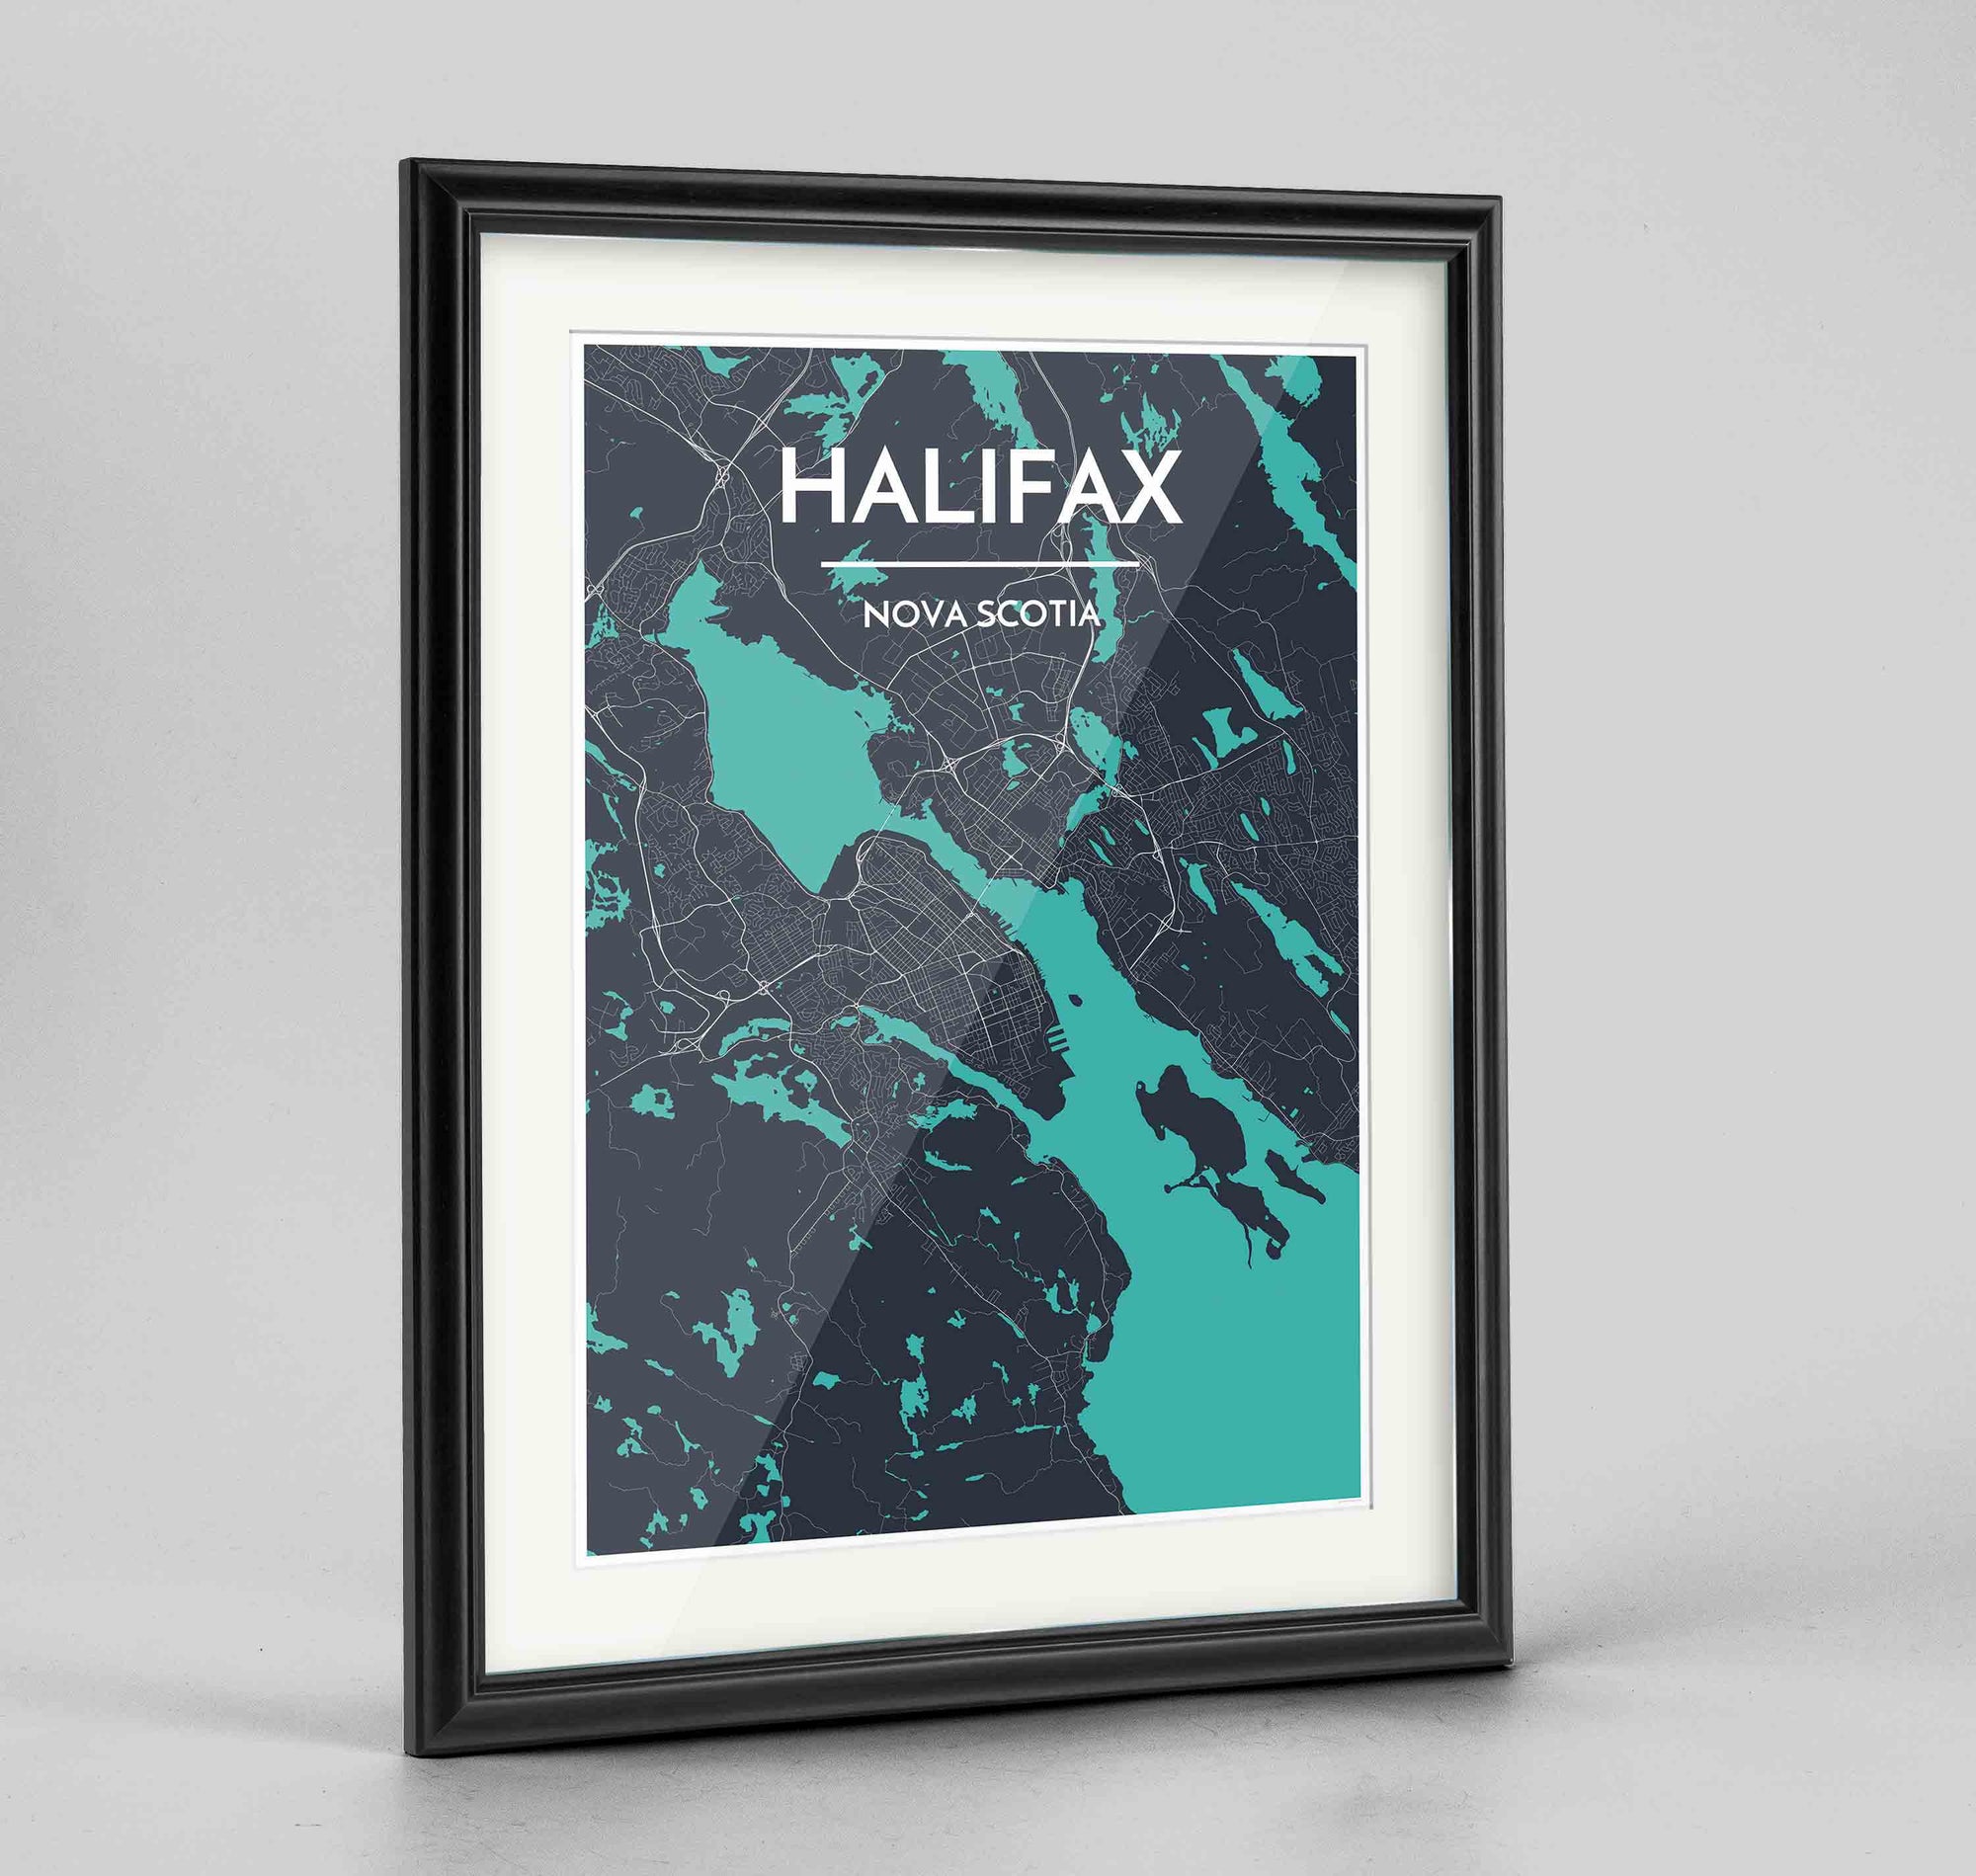 Framed Halifax City Map 24x36" Traditional Black frame Point Two Design Group